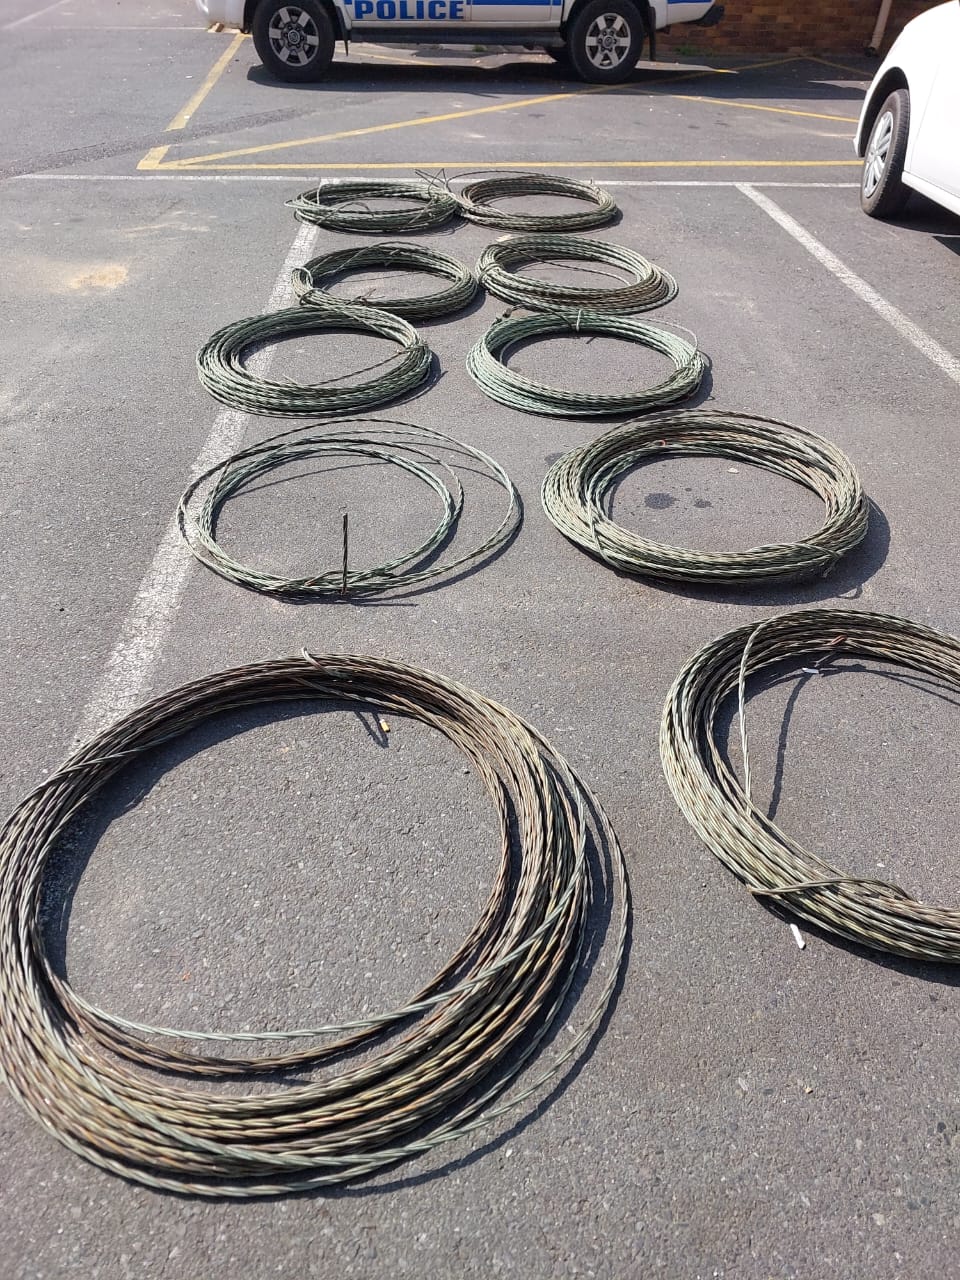 Police apprehend suspects with copper cables